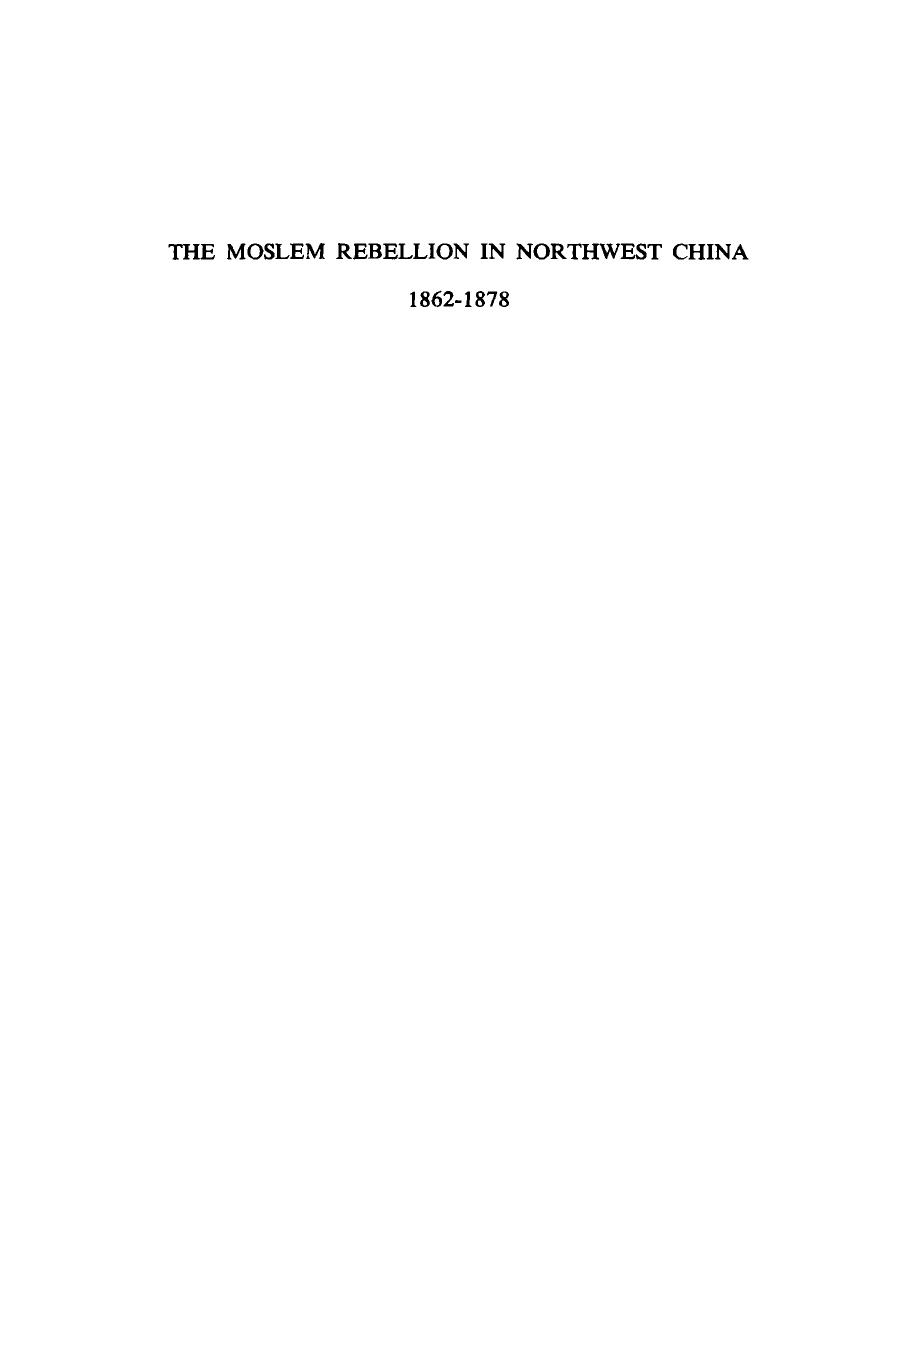 The Moslem rebellion in northwest China, 1862 - 1878: a study of government minority policy by Wen Djang Chu